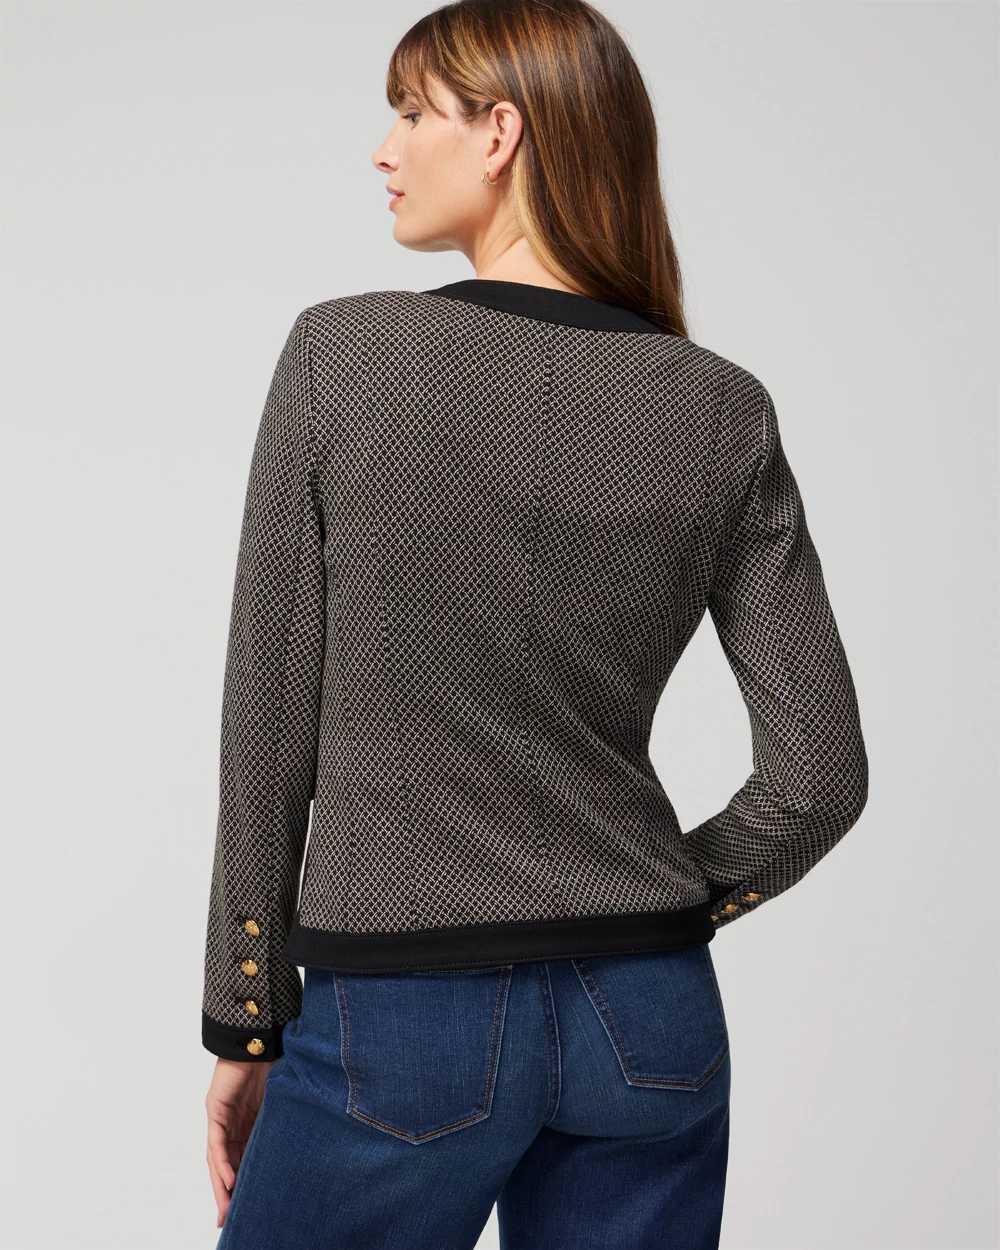 Petite WHBM® Jacquard Knit Stylist Jacket click to view larger image.